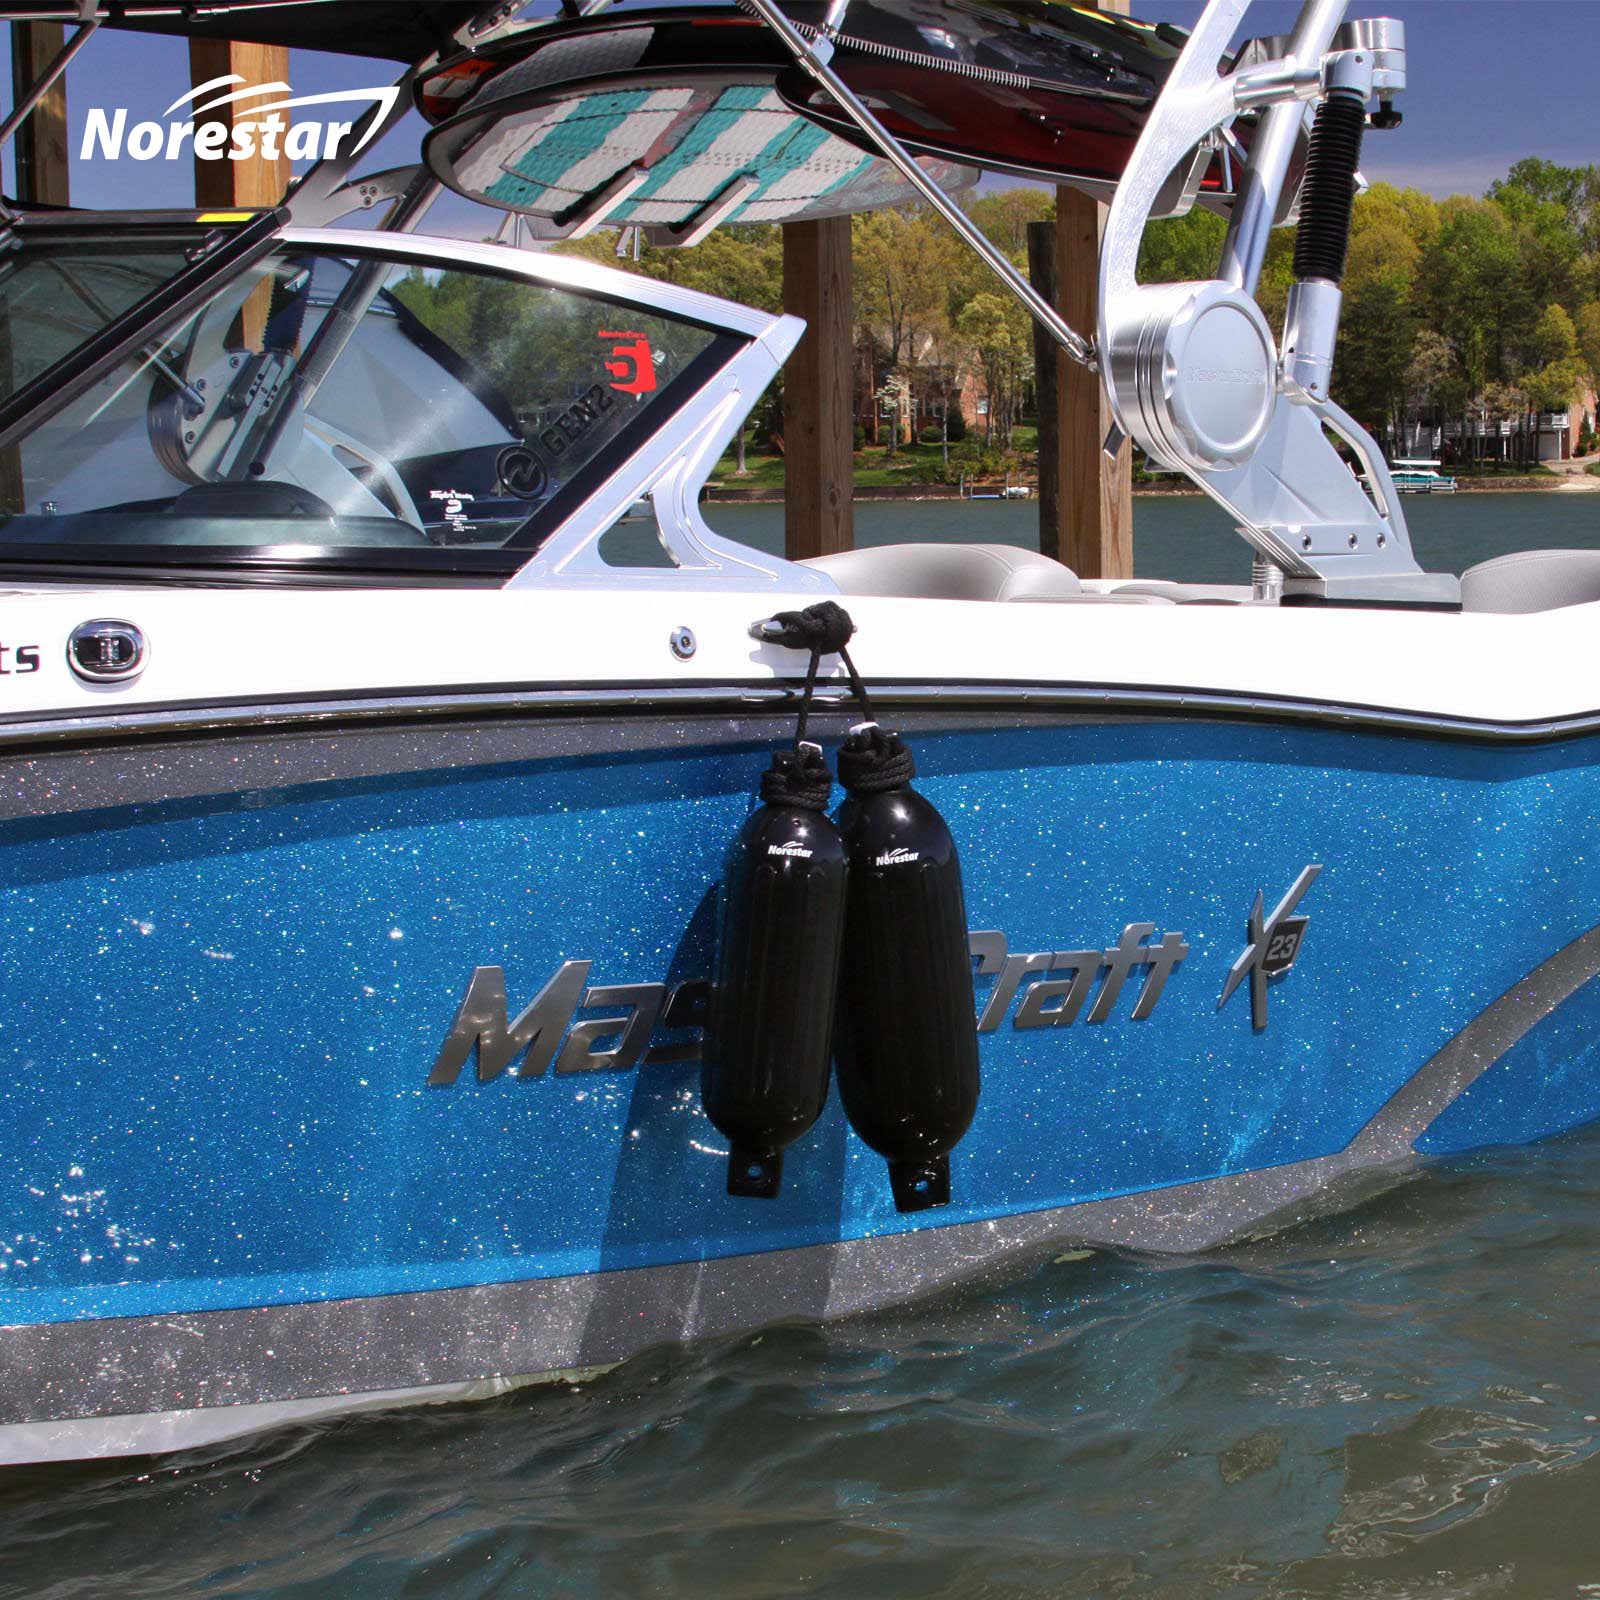 Norestar Ribbed Fenders On Boat